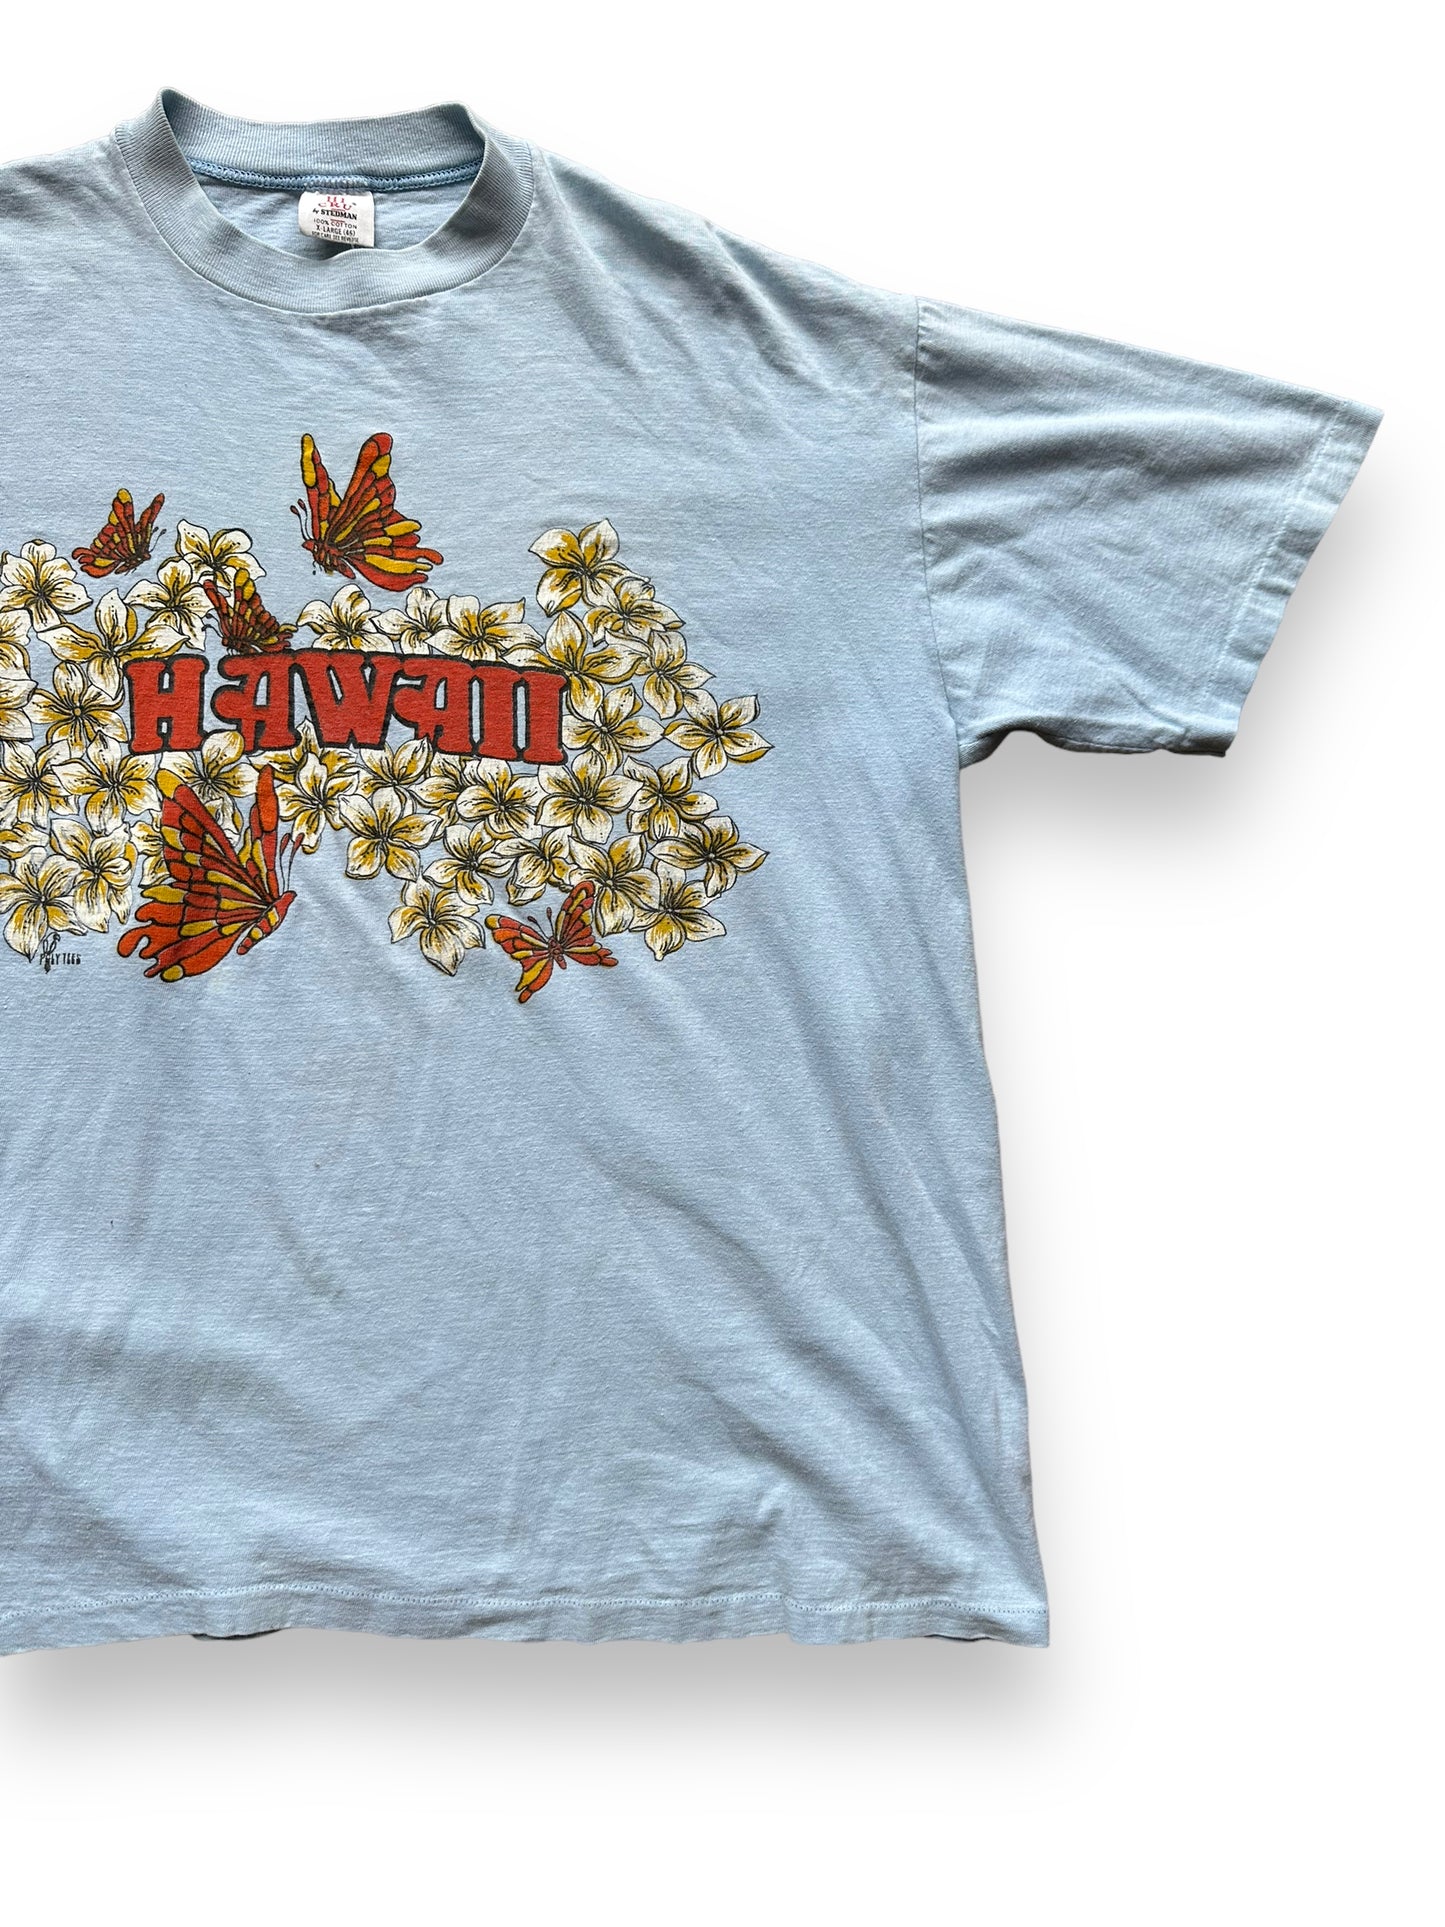 Front Left View of Vintage Hawaii Graphic Tee SZ XL | Vintage T-Shirts Seattle | Barn Owl Vintage Tees Seattle